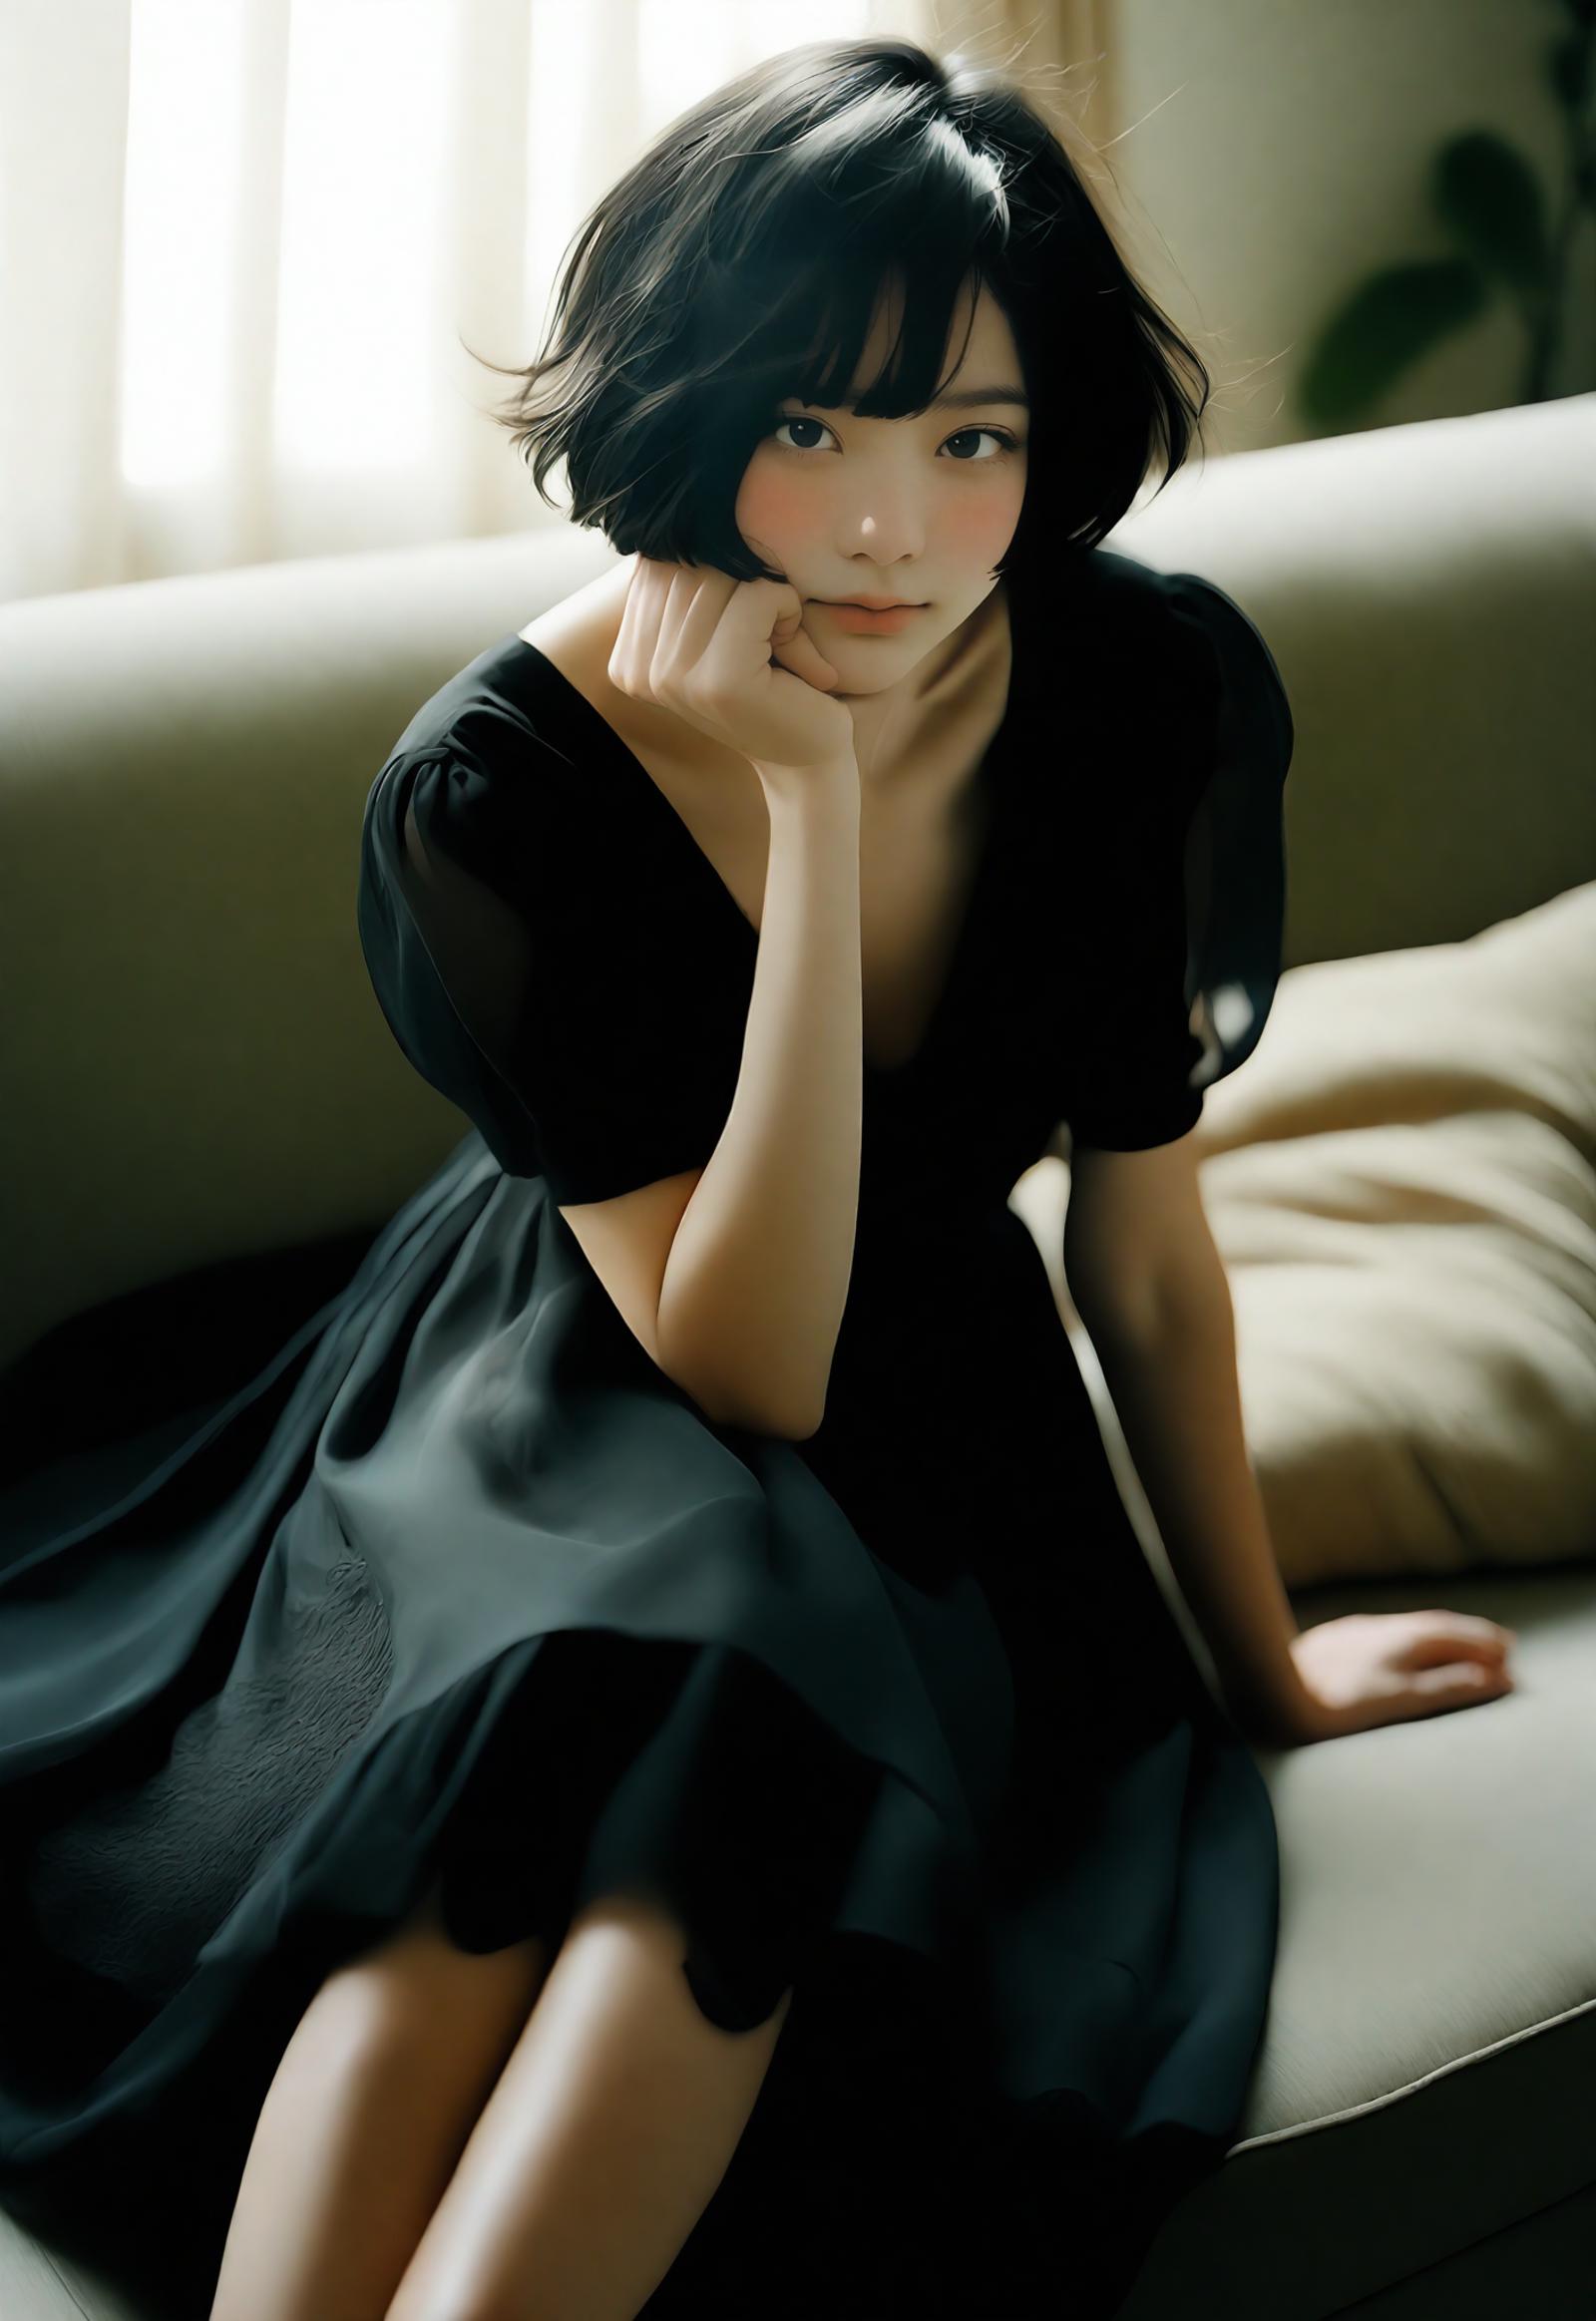 A young woman wearing a black dress sitting on a couch and posing for the camera.